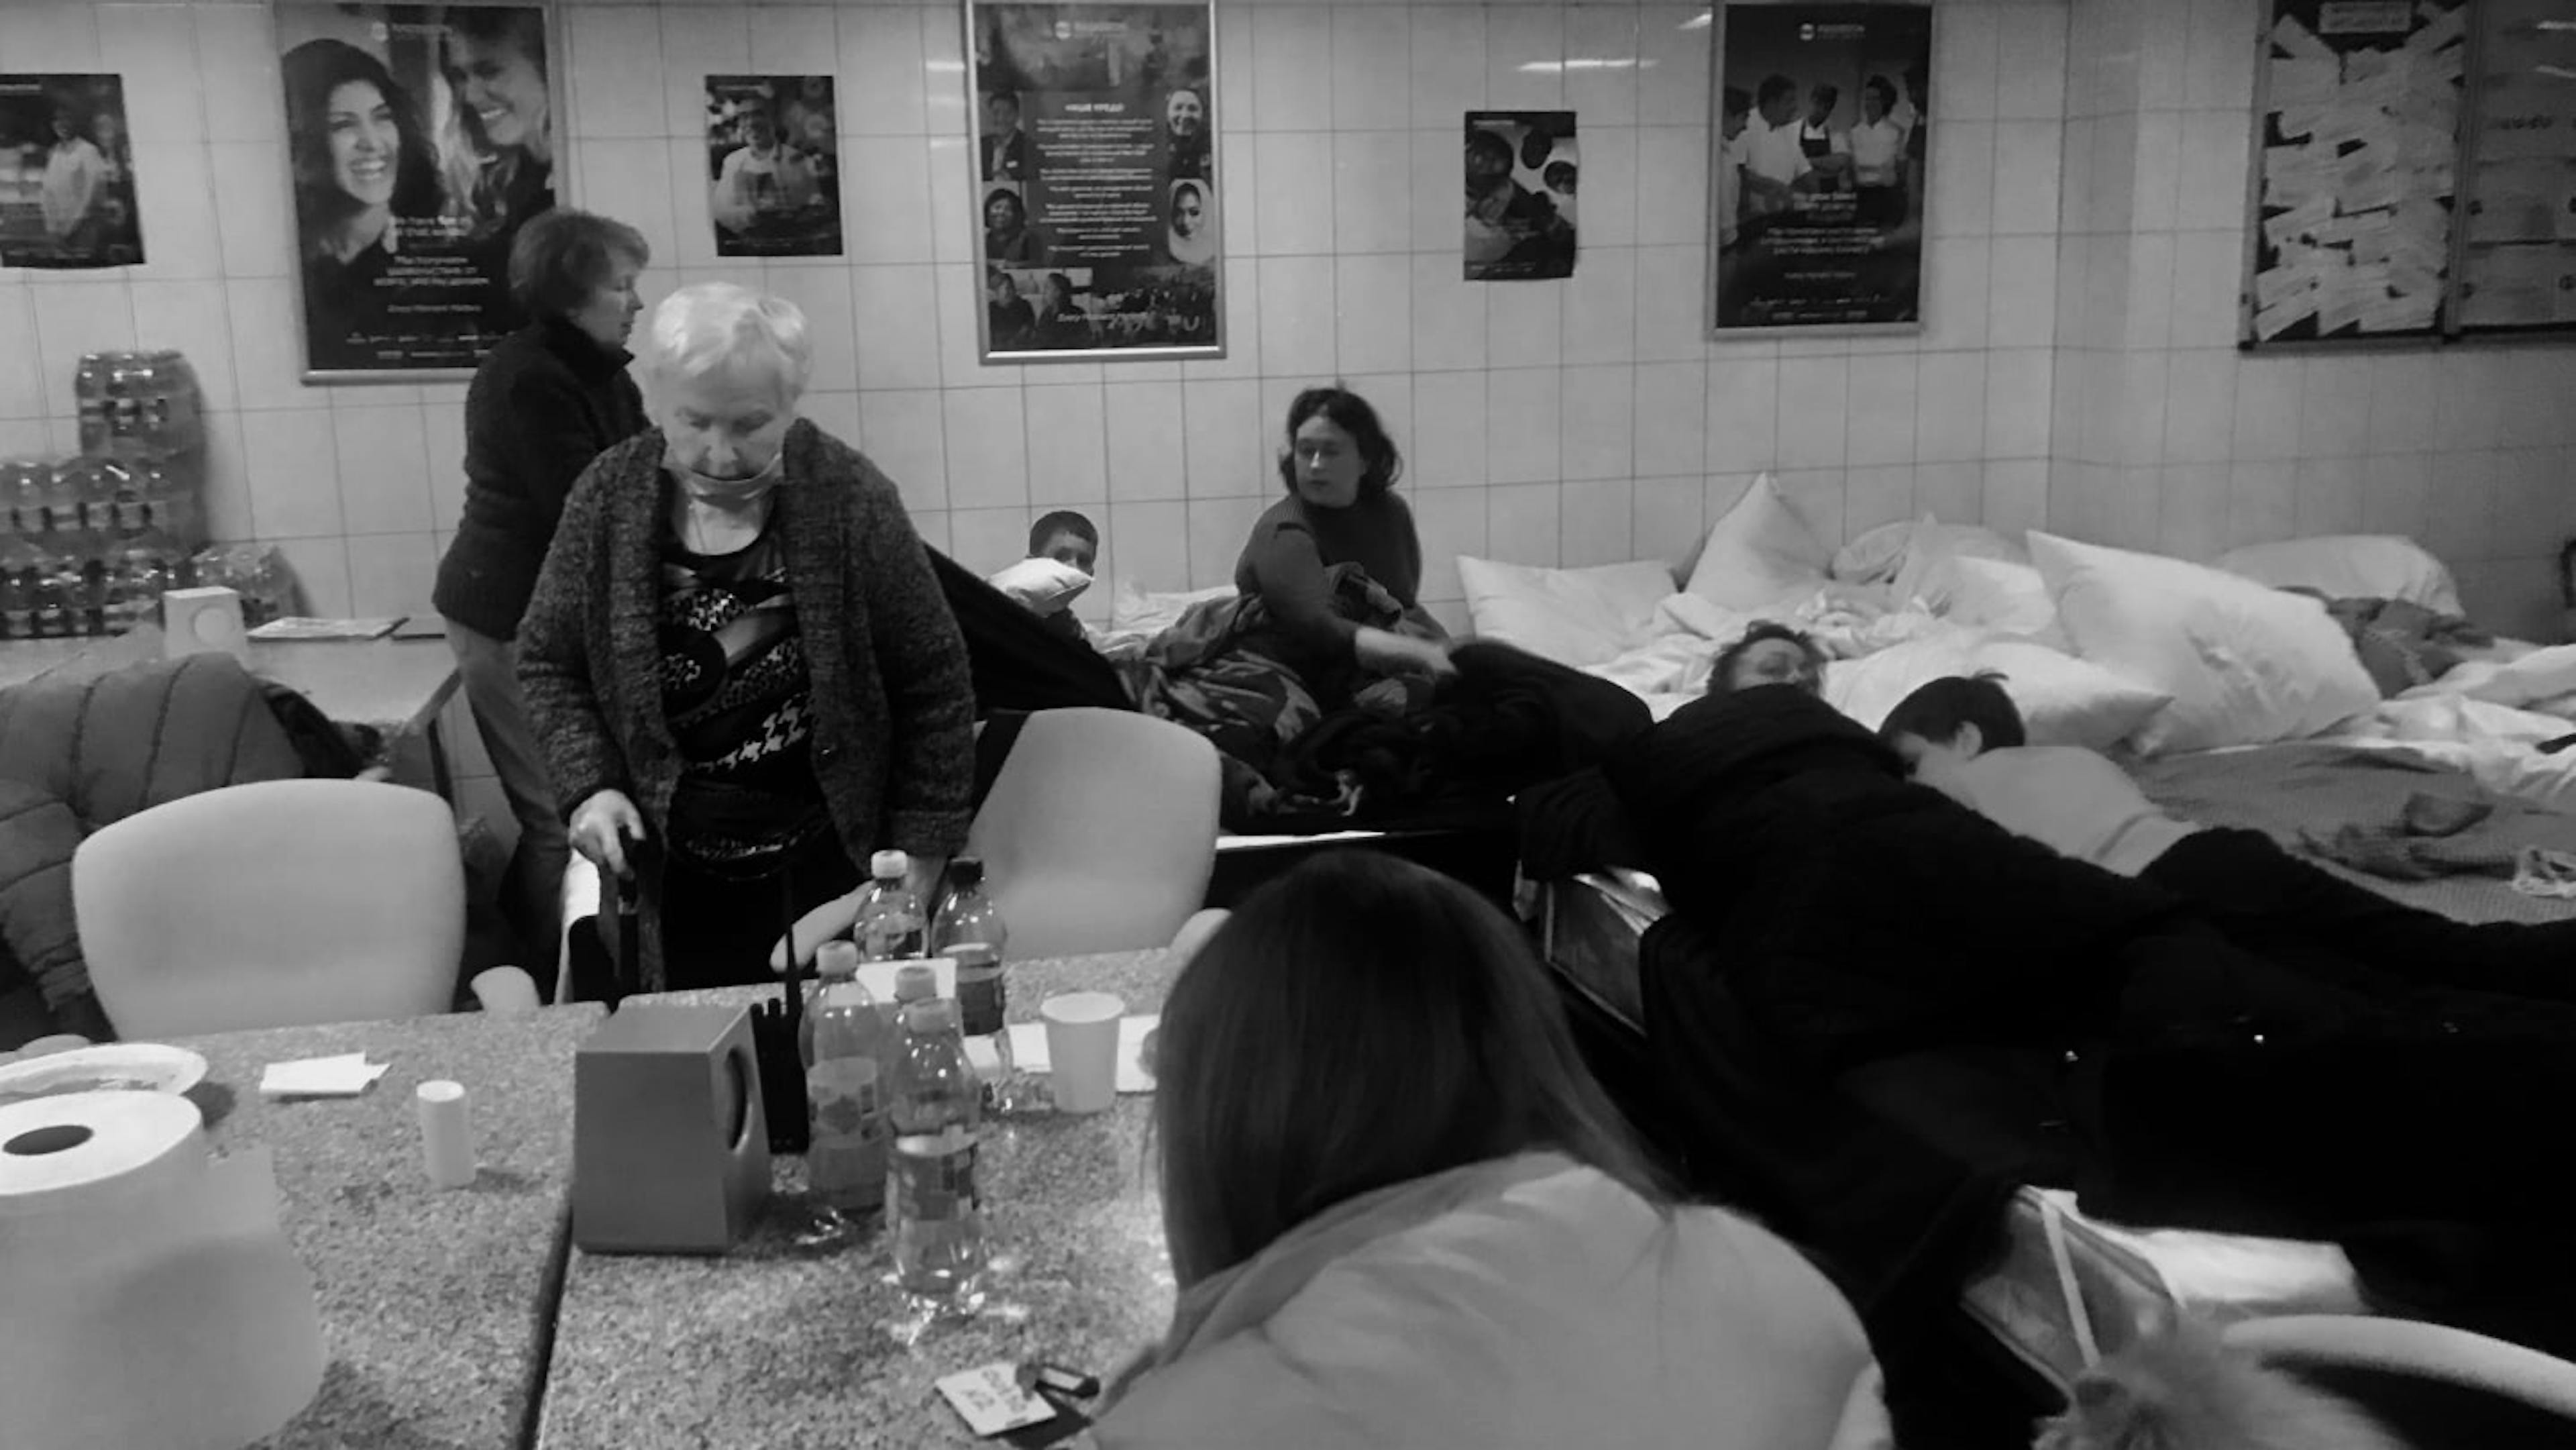 Hotel guests taking shelter in a hotel basement in Kyiv.